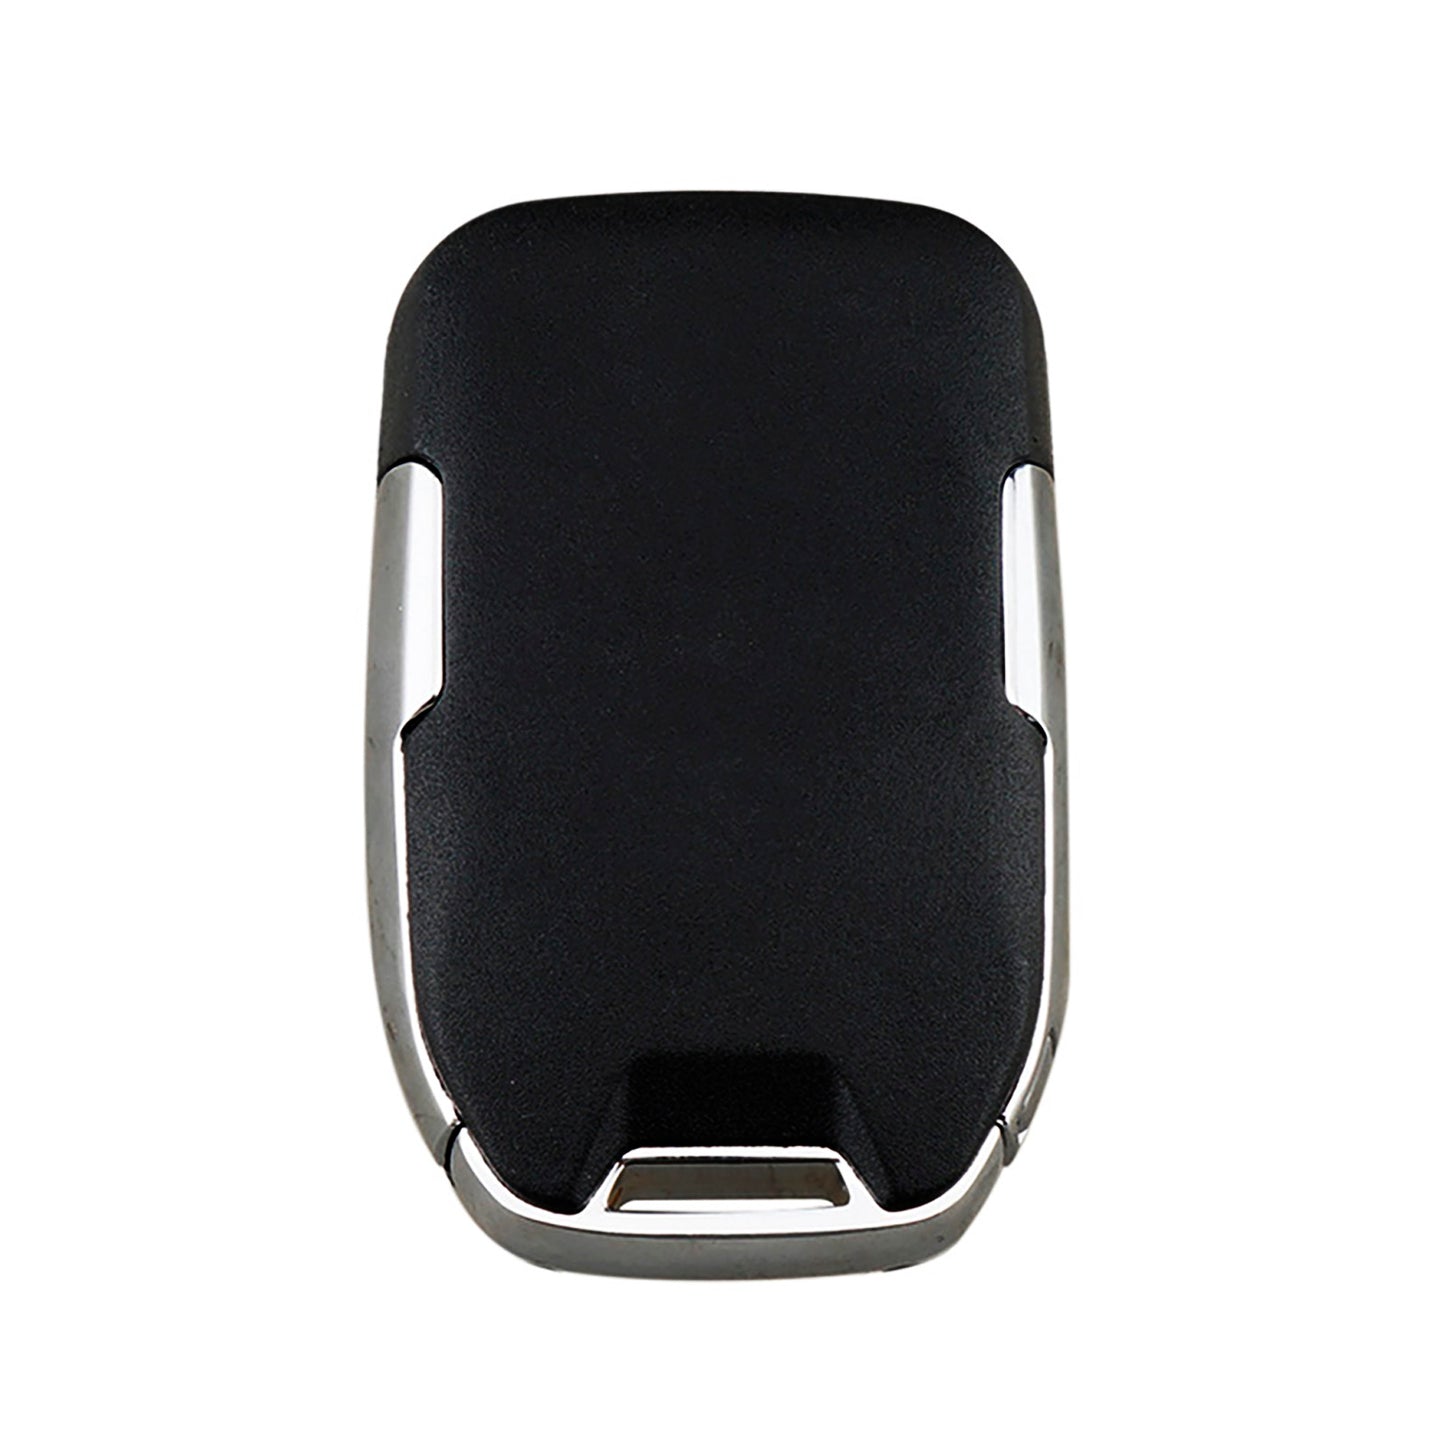 5 Buttons HYQ1AA 315MHz Smart Keyless Entry Car Fob Remote Key For GMC Terrain Auto Parts SKU : J244